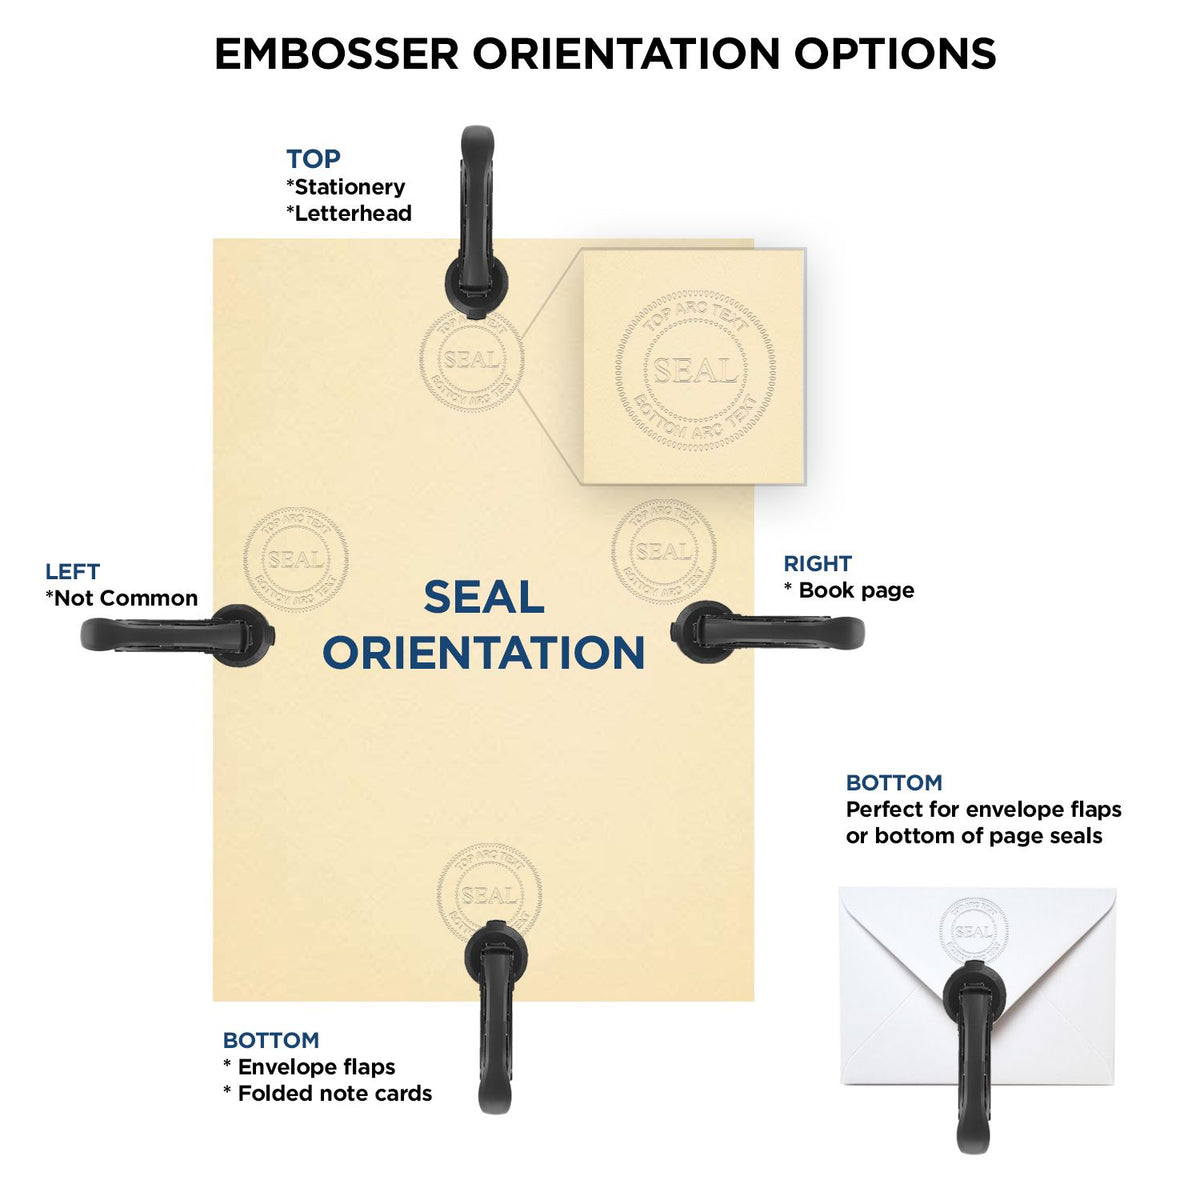 An infographic for the Long Reach Louisiana Land Surveyor Seal showing embosser orientation, this is showing examples of a top, bottom, right and left insert.